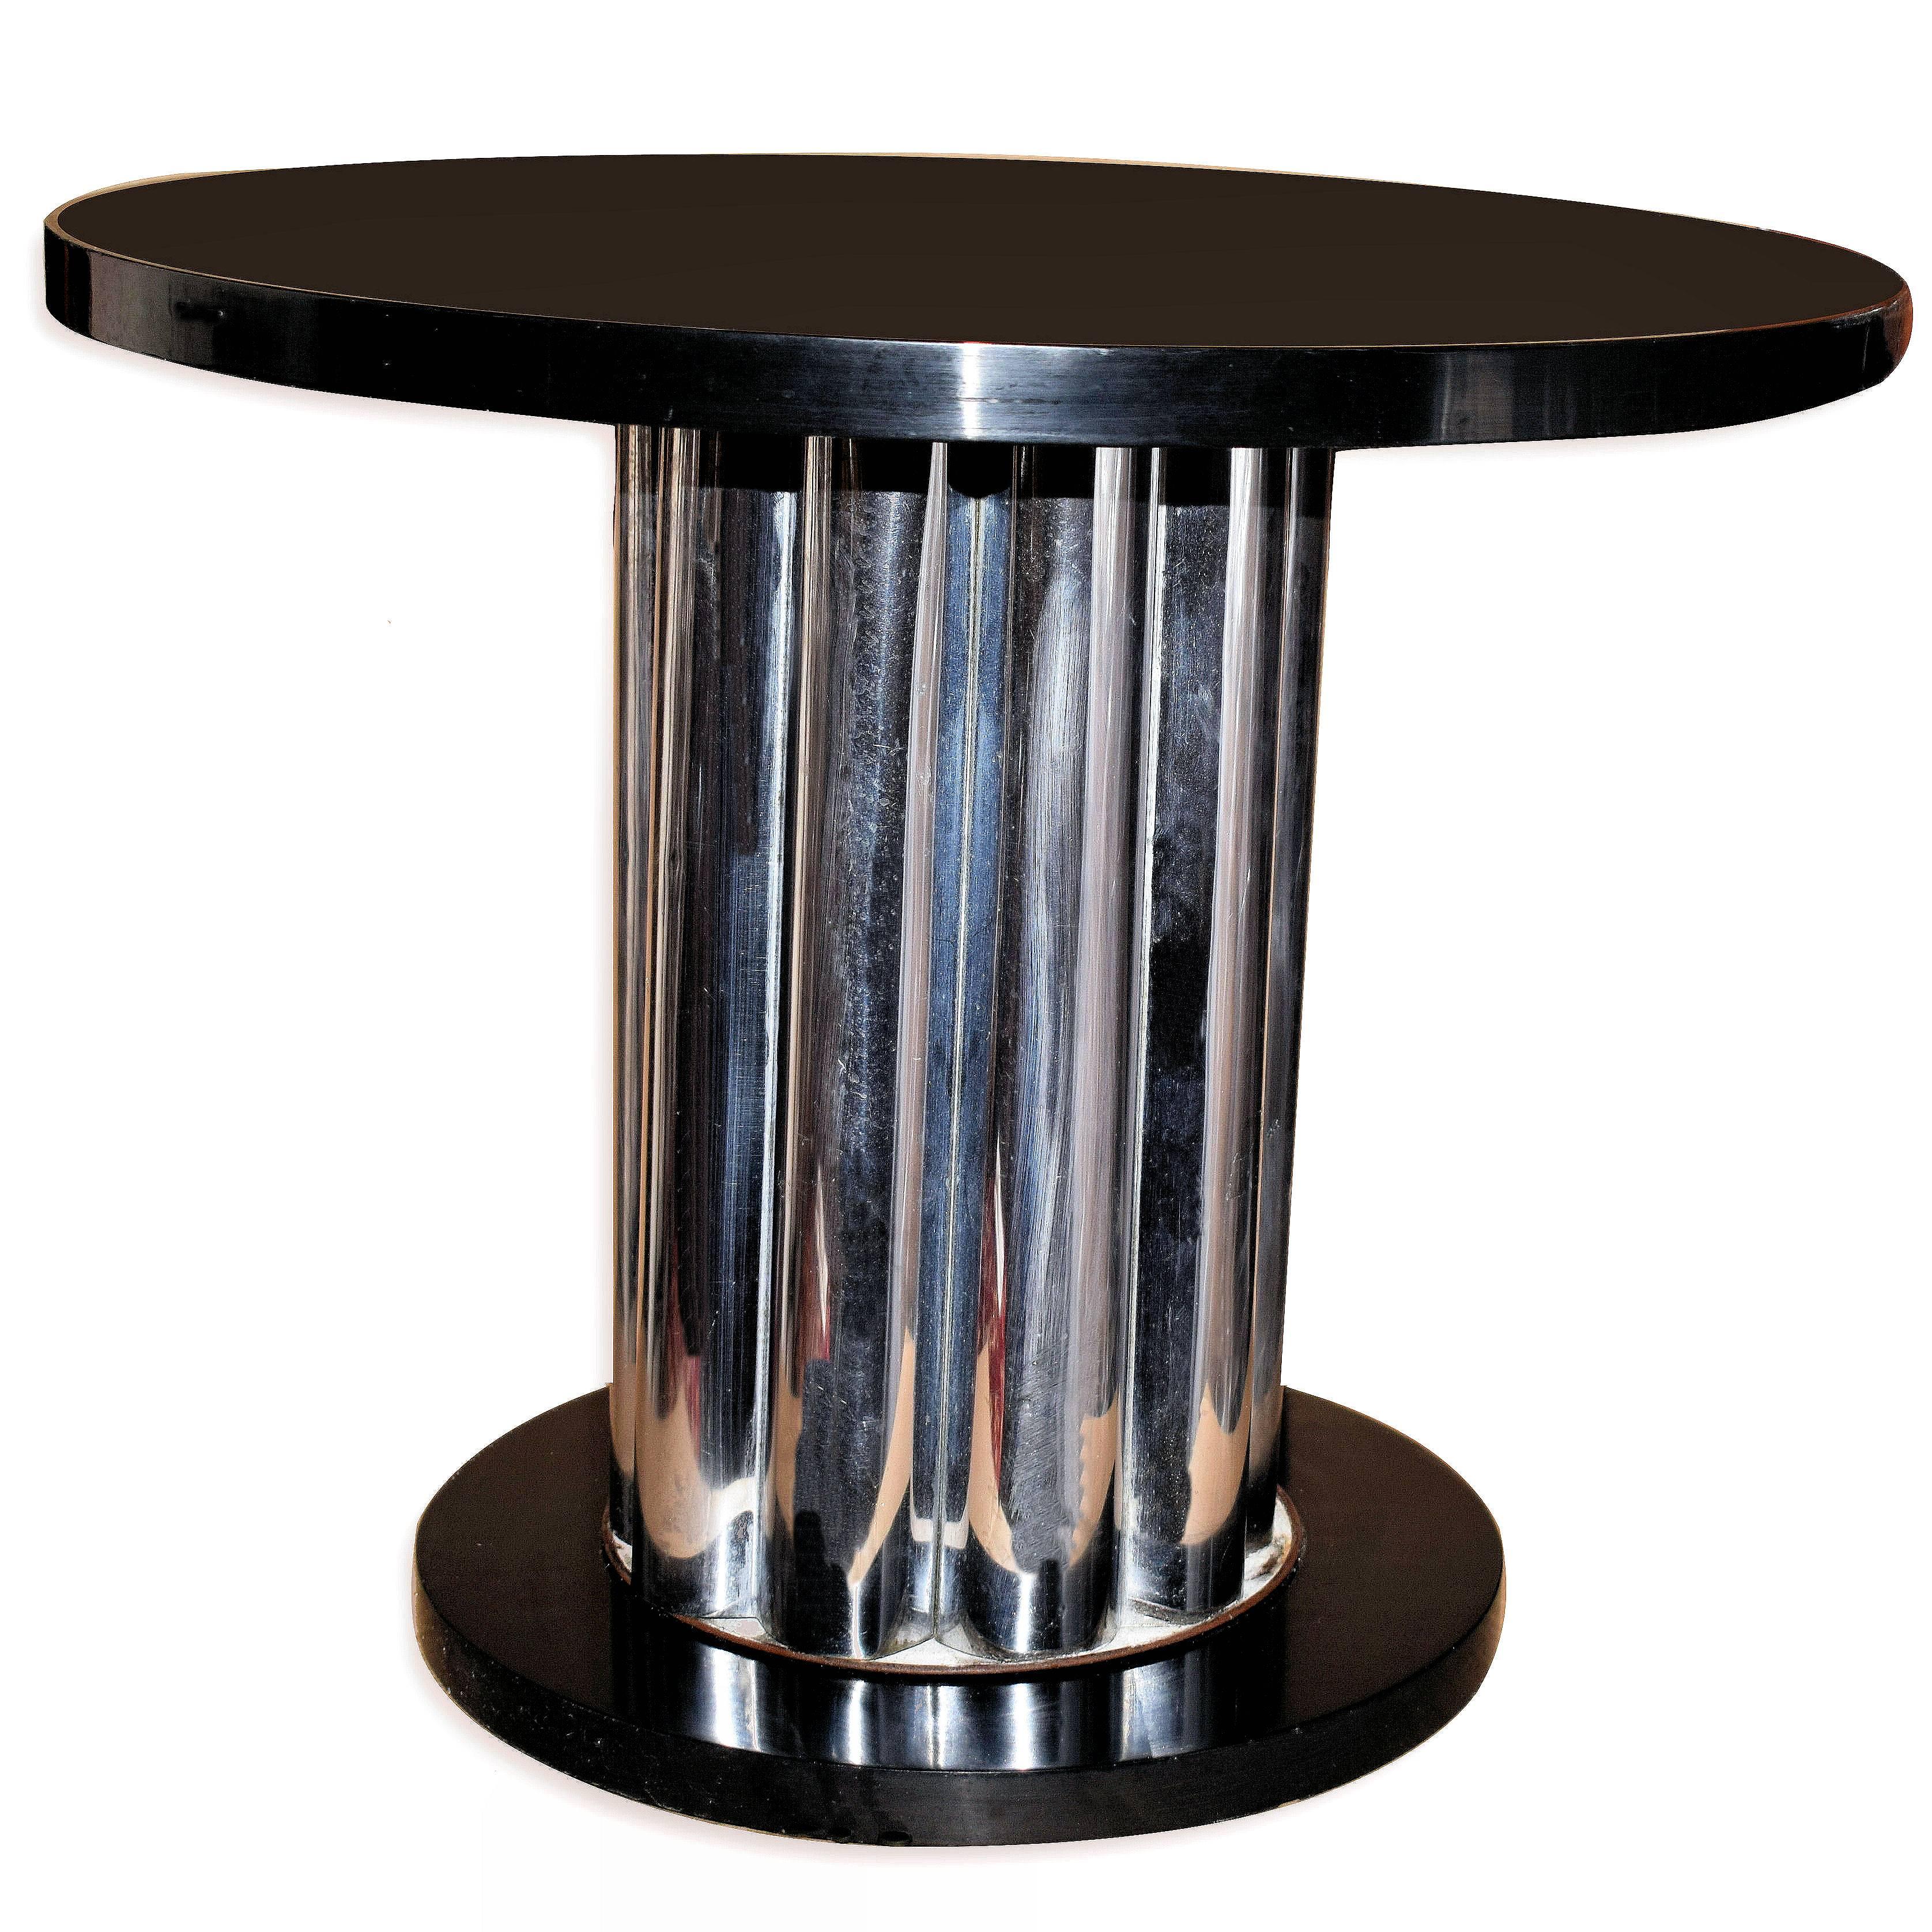 A table with the wow factor is this totally authentic Art Deco modernist table dating to the 1930s. Features a very highly polished ebonized top with a drum column which made up from corrogated chrome panels, all of which sits on a circular ebonized